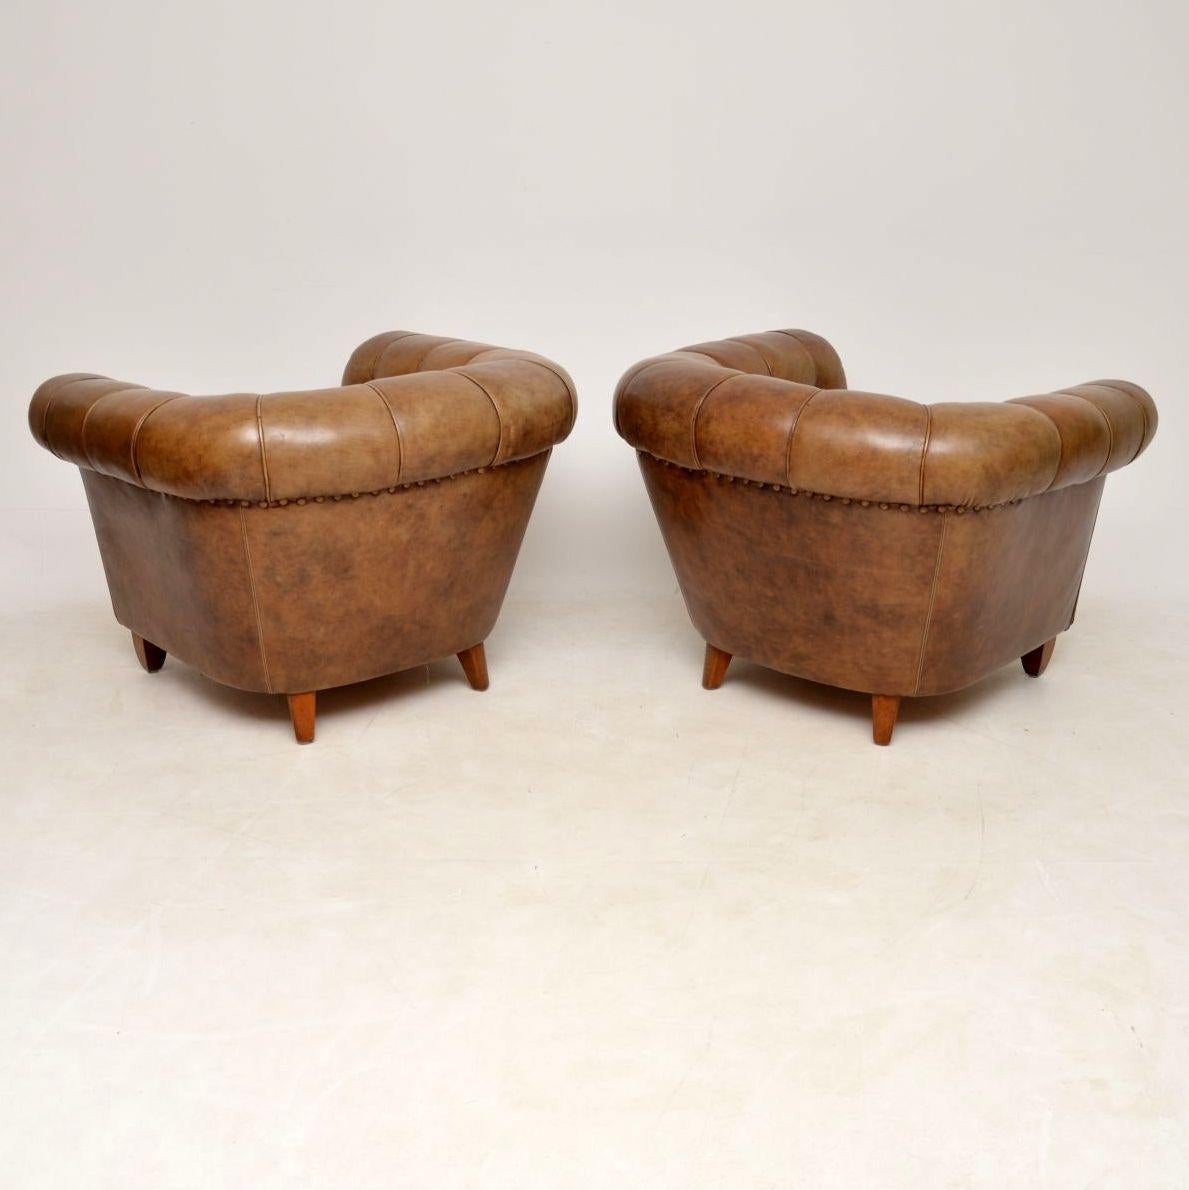  Pair of Antique Swedish Leather Chesterfield Armchairs 5